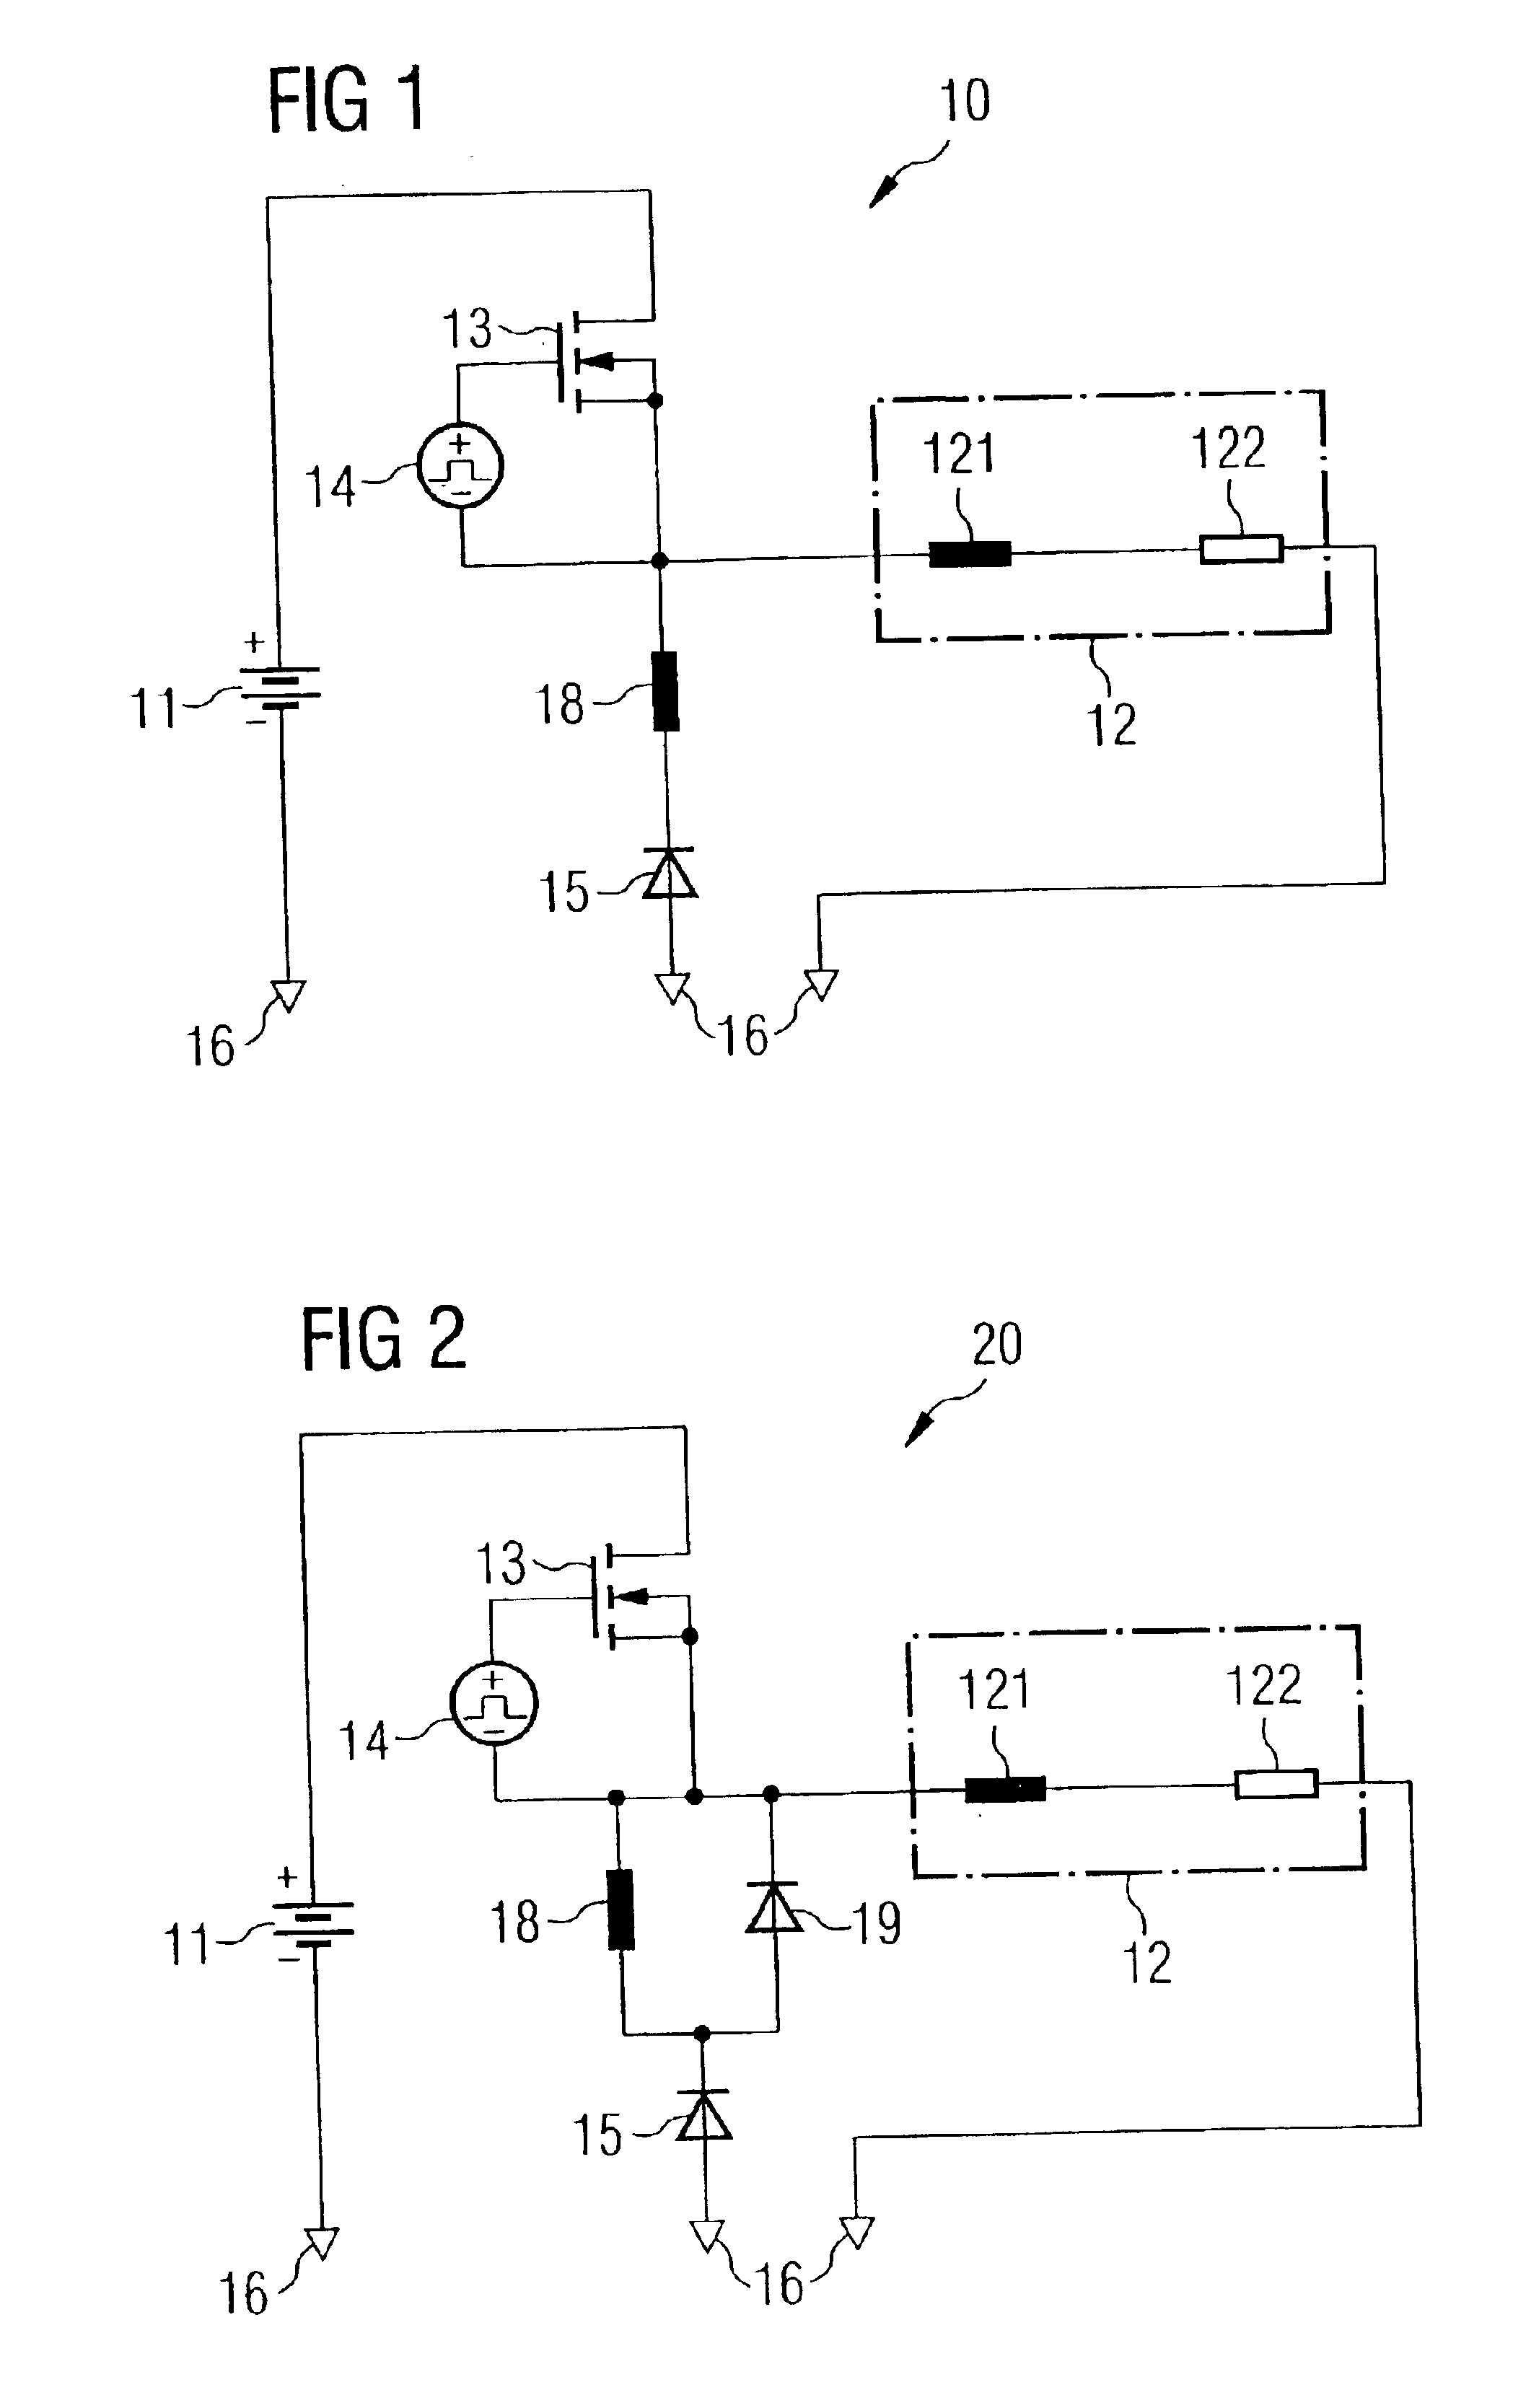 Circuit arrangement for high-speed switching of inductive loads